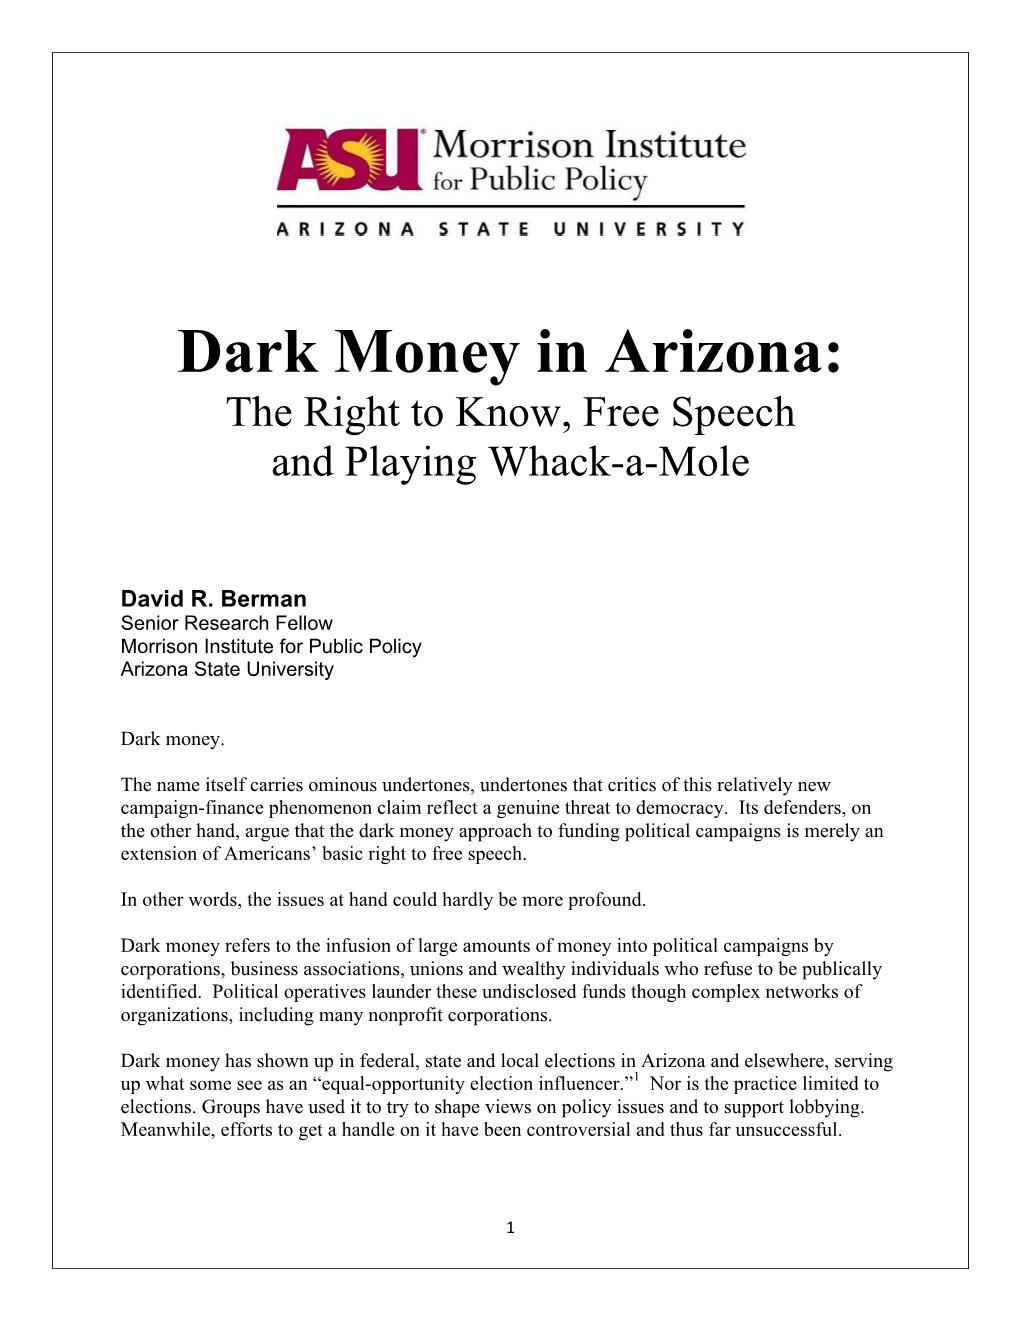 Dark Money in Arizona: the Right to Know, Free Speech and Playing Whack-A-Mole